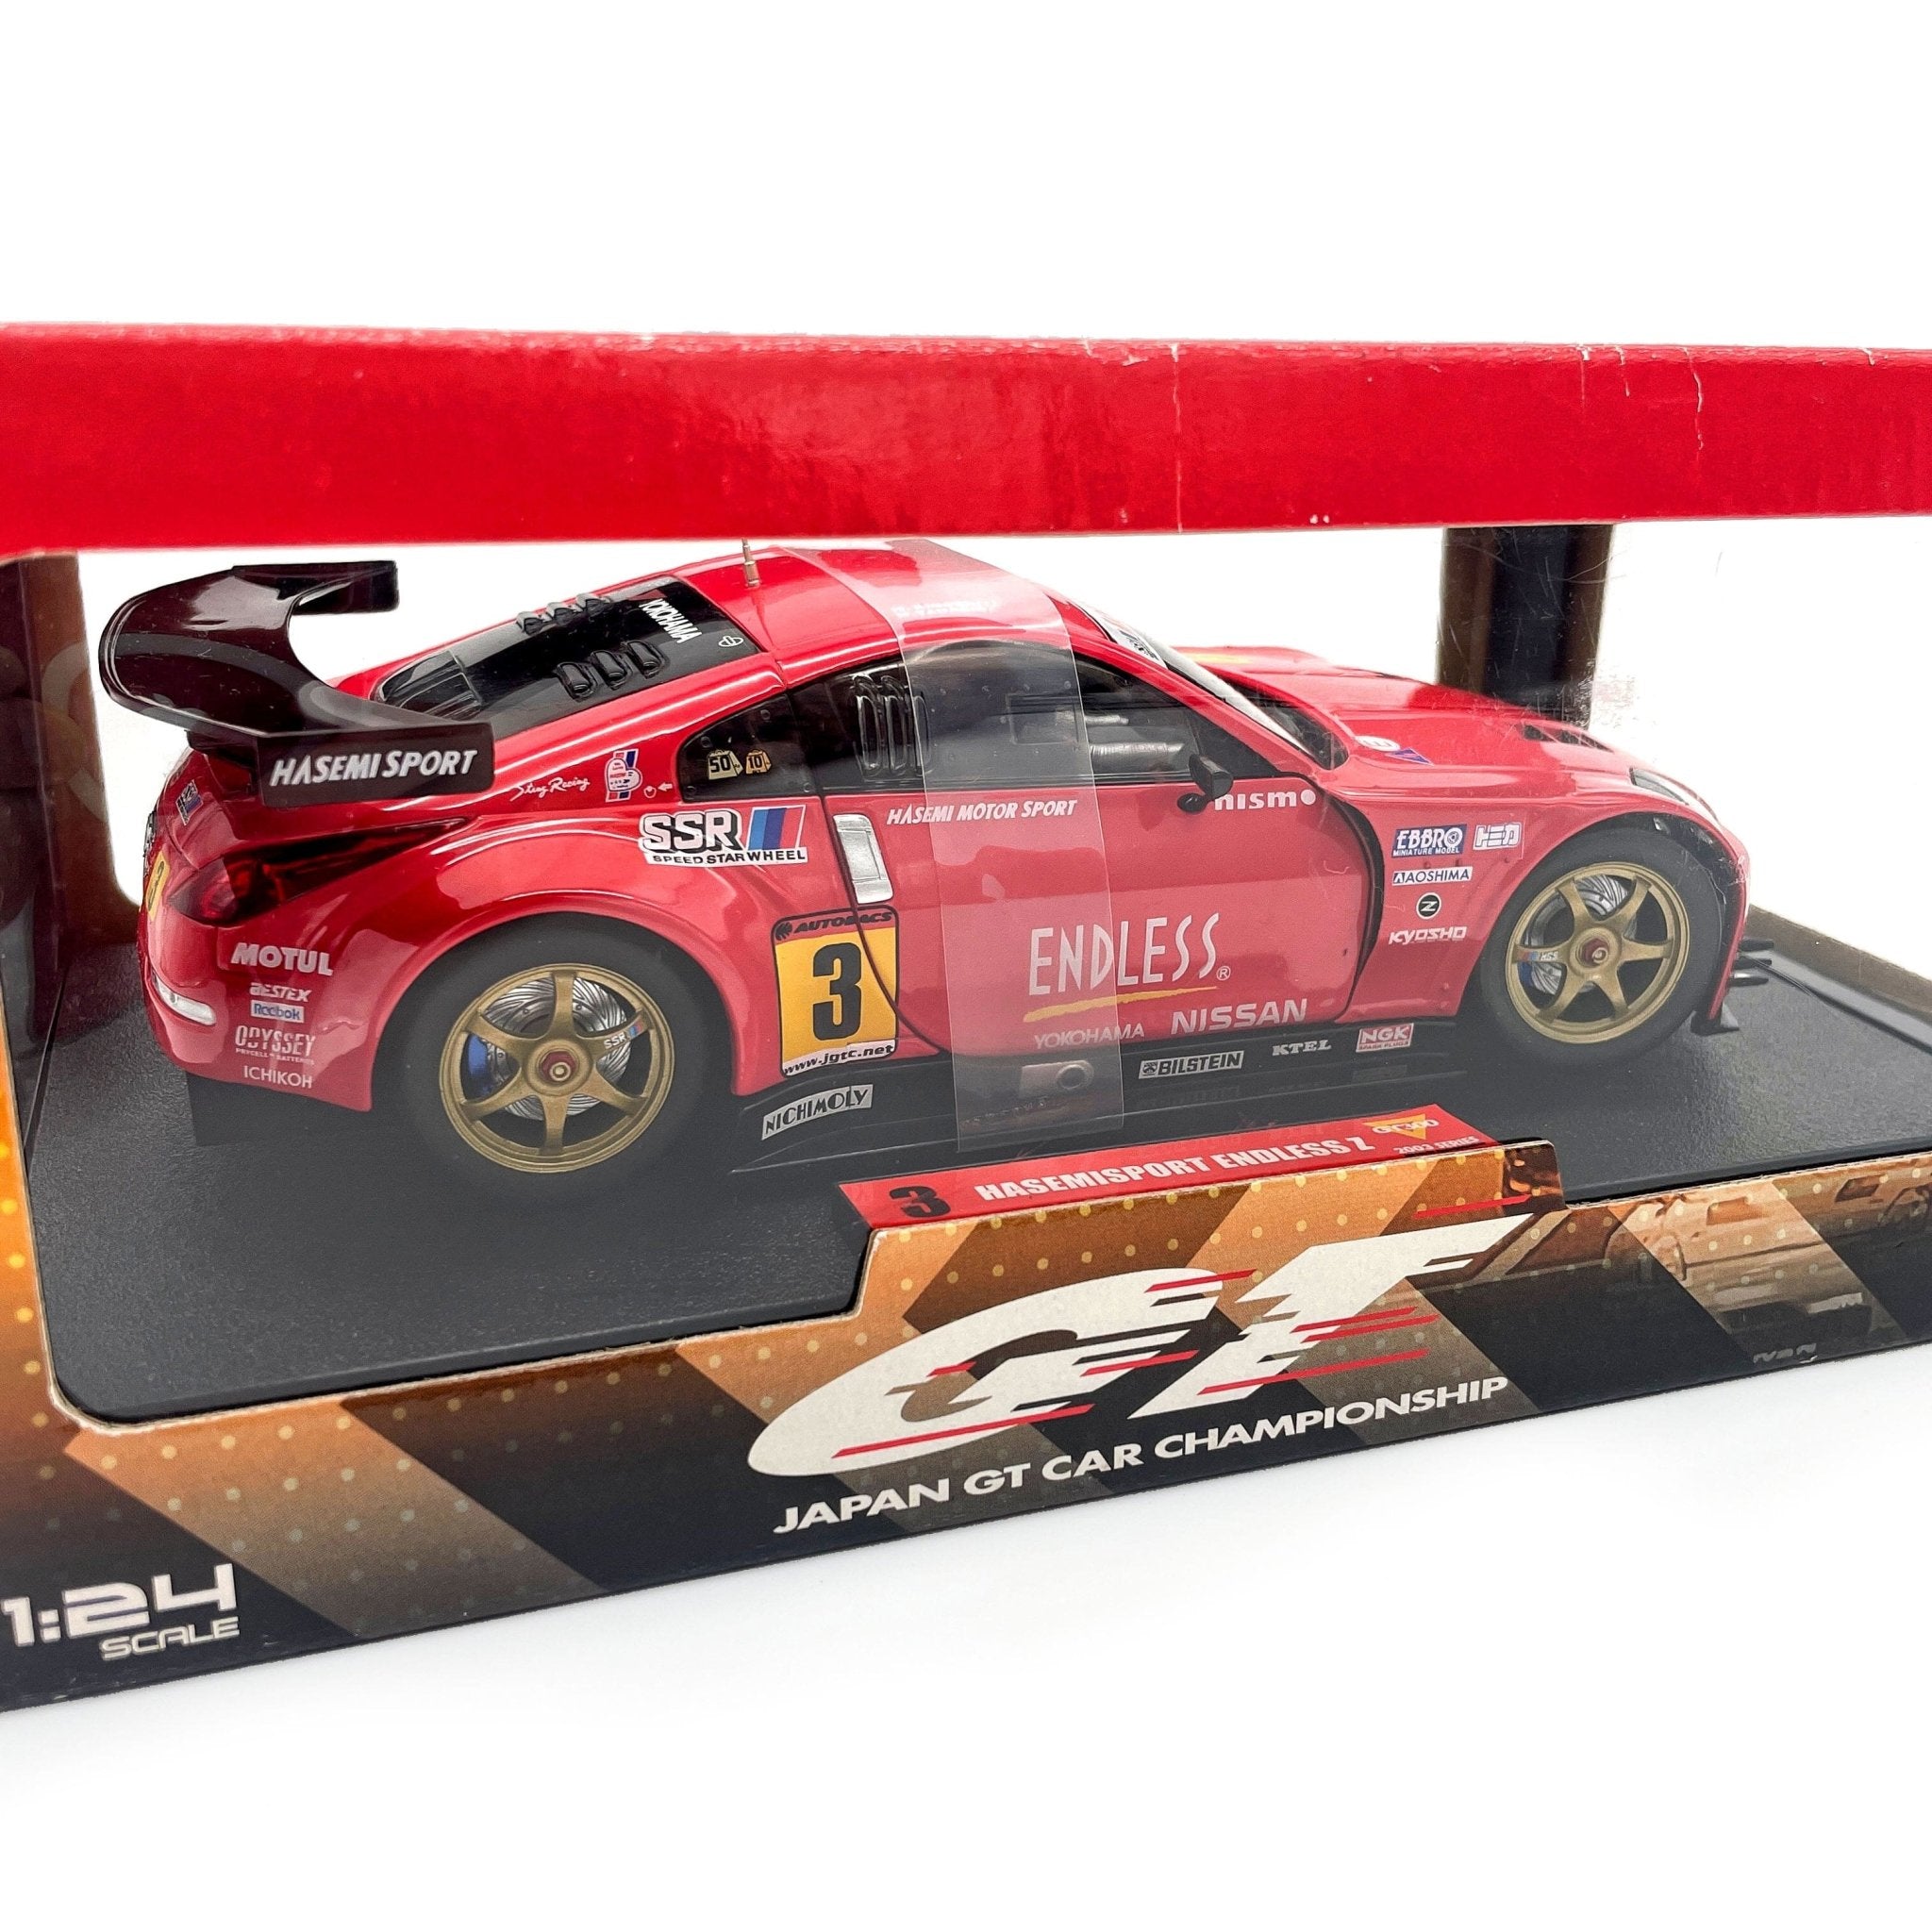 Rare Muscle Machines Japan GT Car Hasemisport Endless Z Diecast 1 